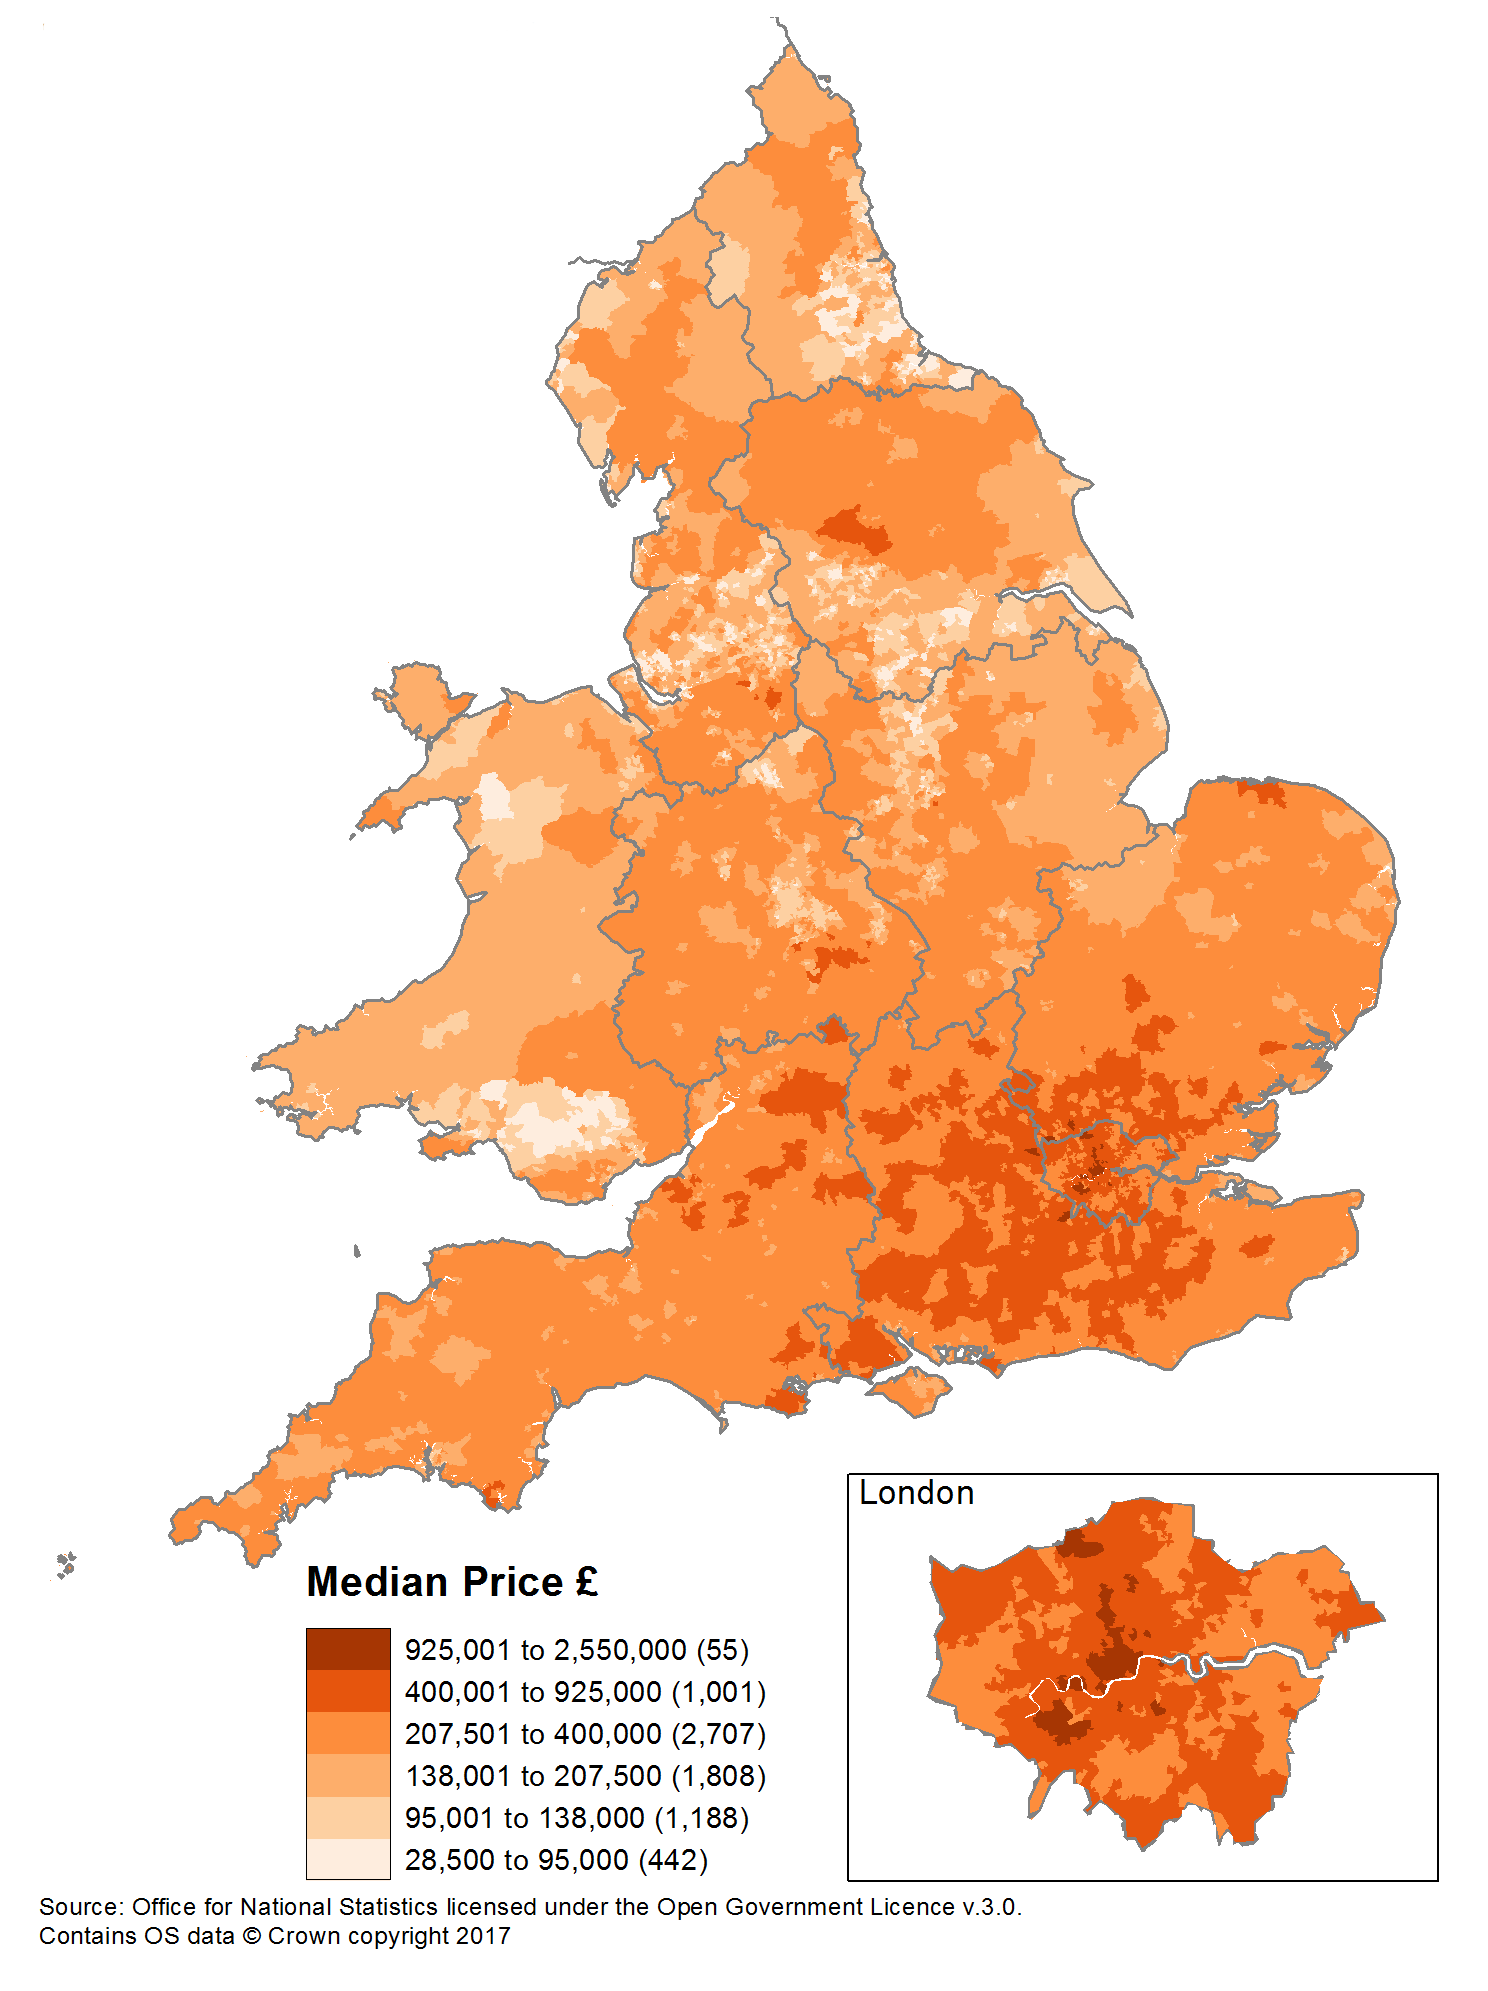 442 neighbourhoods had a median price paid of £95,000 or less, but none of these were in London, the South East or the South West.